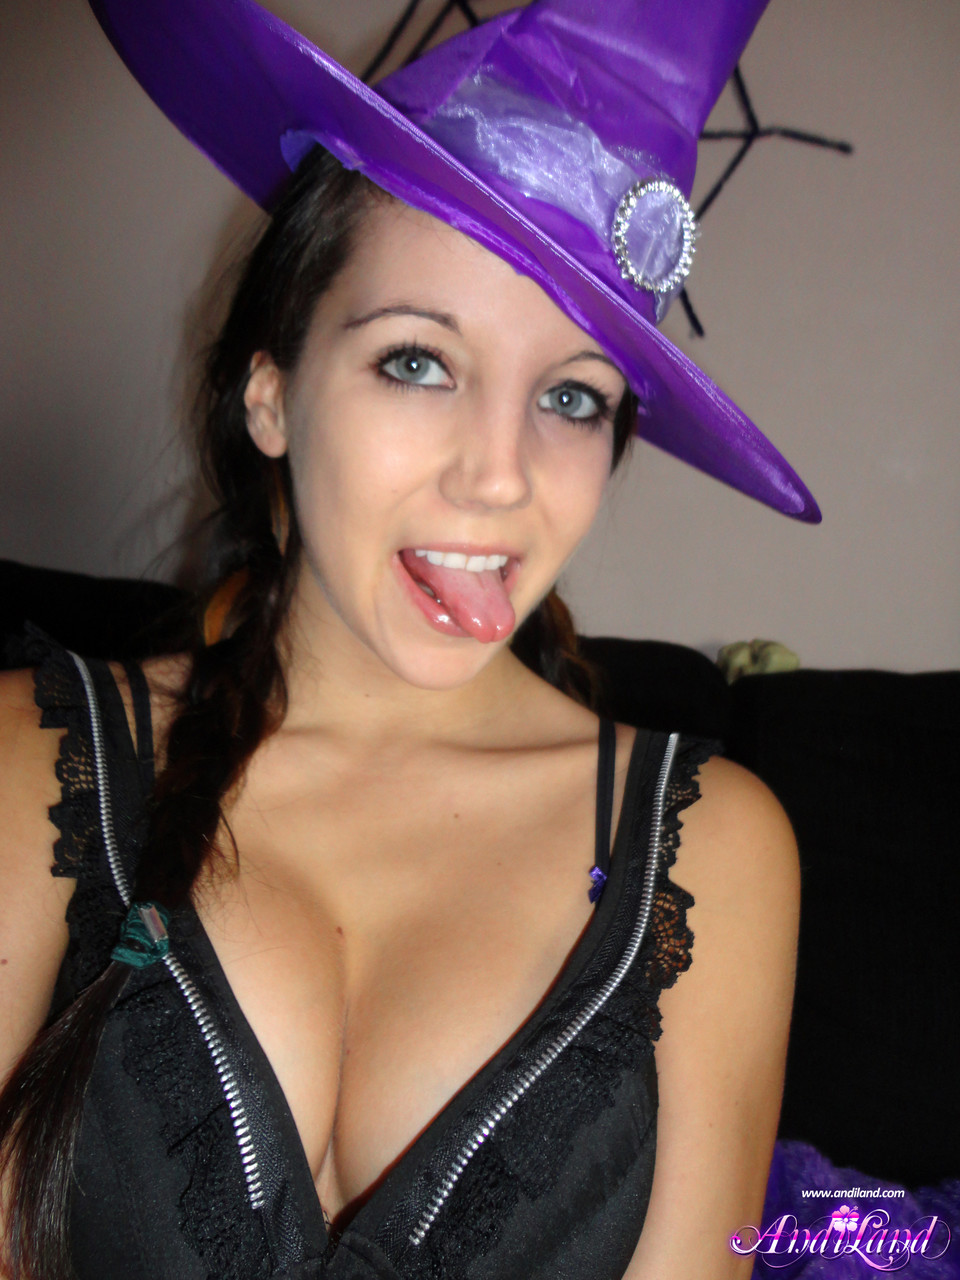 Teen amateur Andi Land teases during upskirt action in a Halloween outfit porno fotoğrafı #428432669 | Andi Land Pics, Andi Land, Cosplay, mobil porno